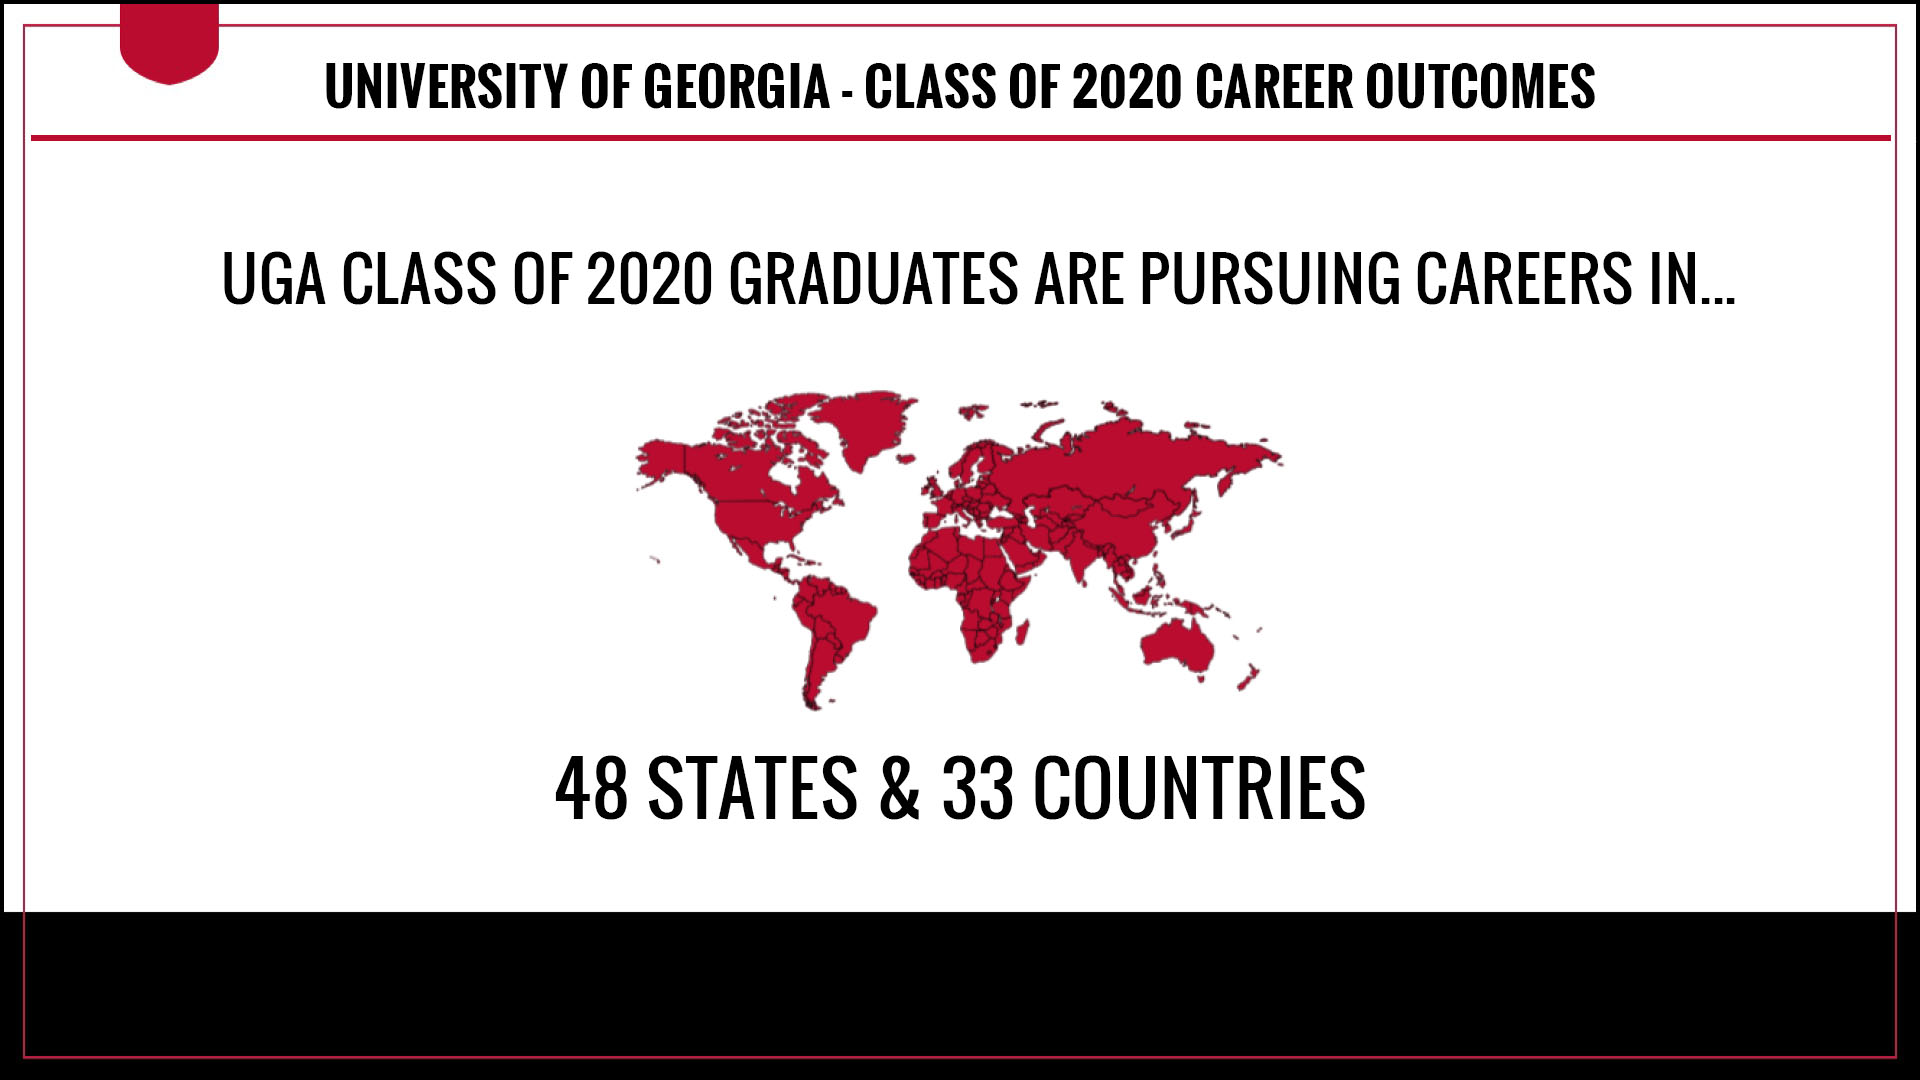 CLASS OF 2020 GRADUATES ARE PURSUING CAREERS IN 48 STATES AND 33 COUNTRIES